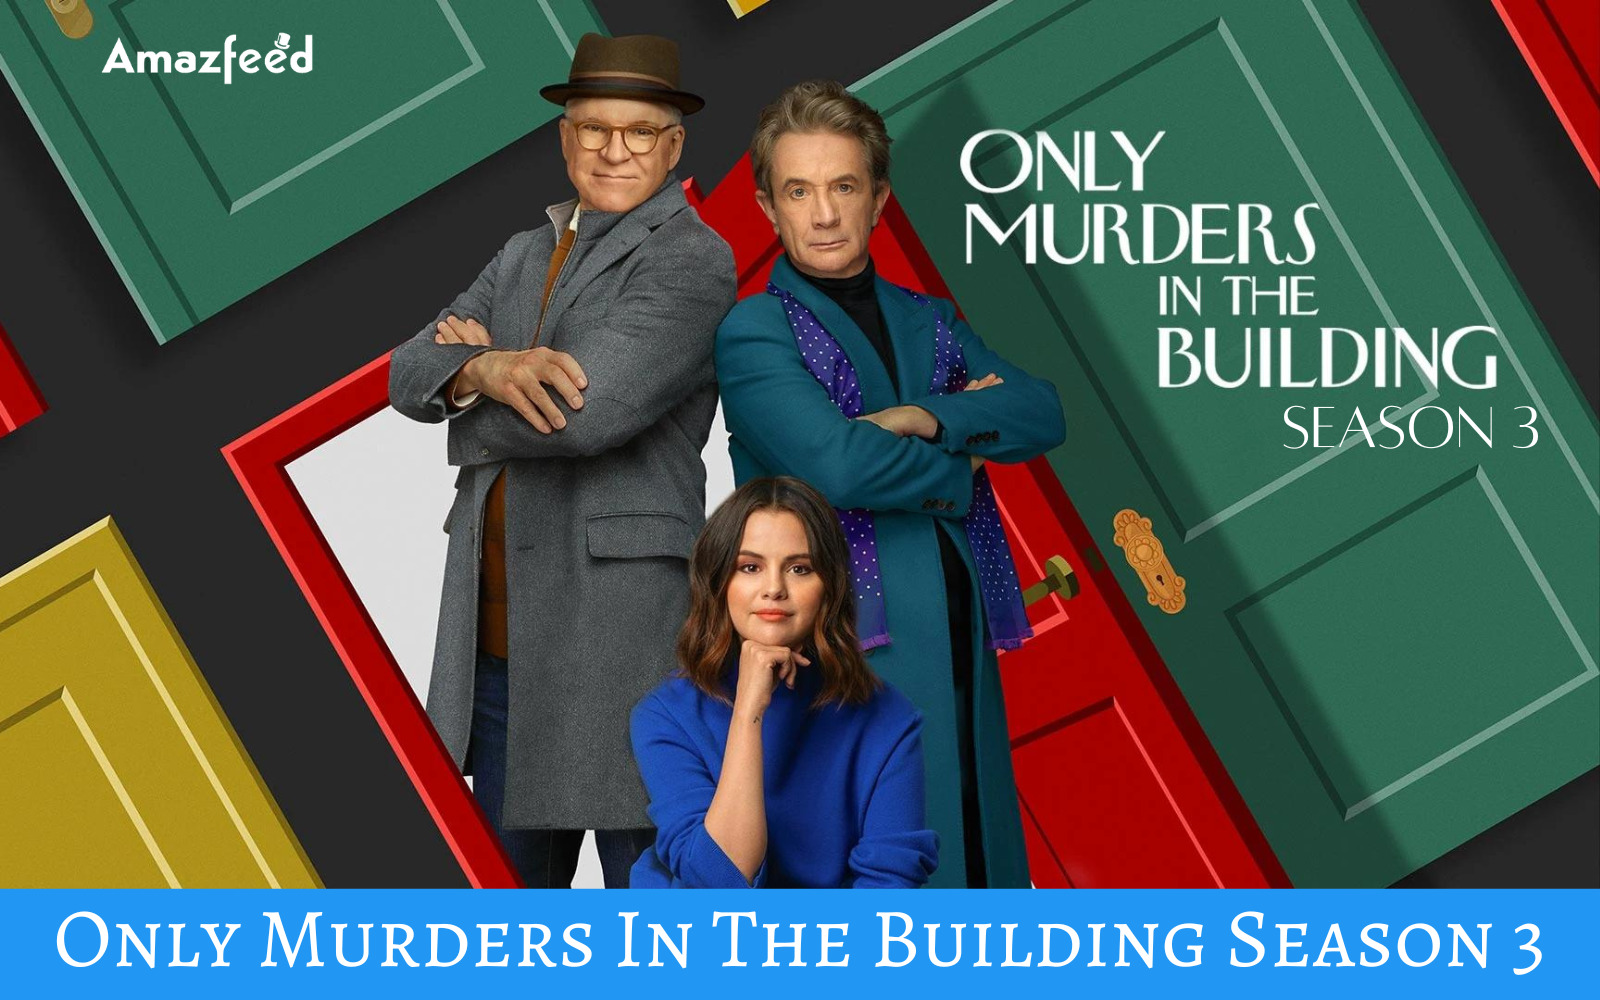 Only Murders In The Building Season 3 ⇒ Release Date, News, Cast